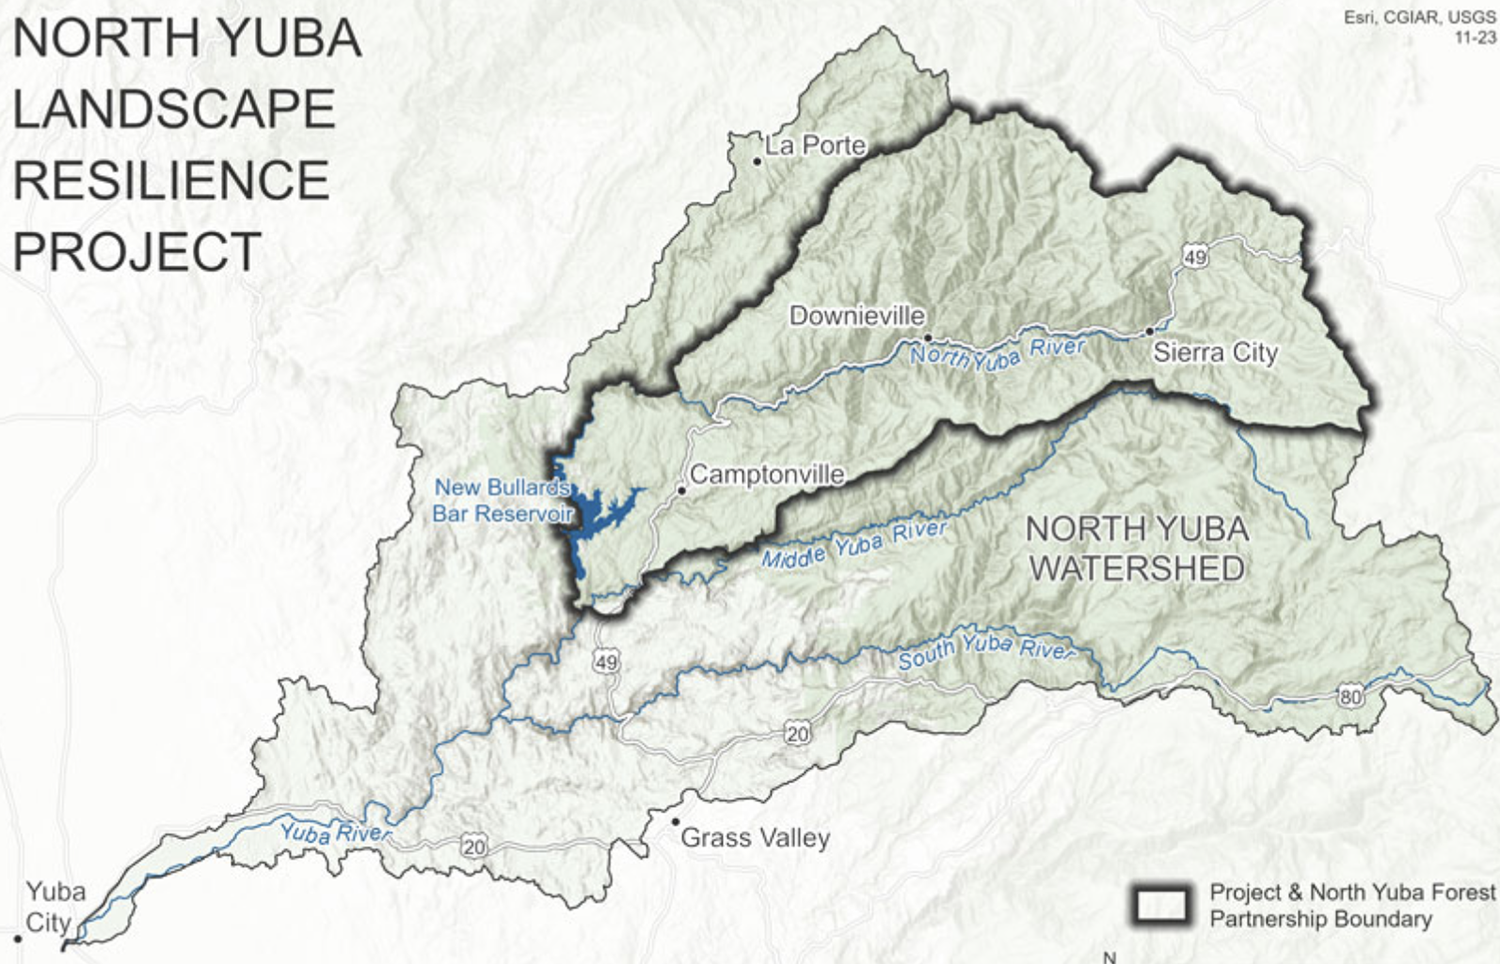 Map of North Yuba Landscape Resilience Project